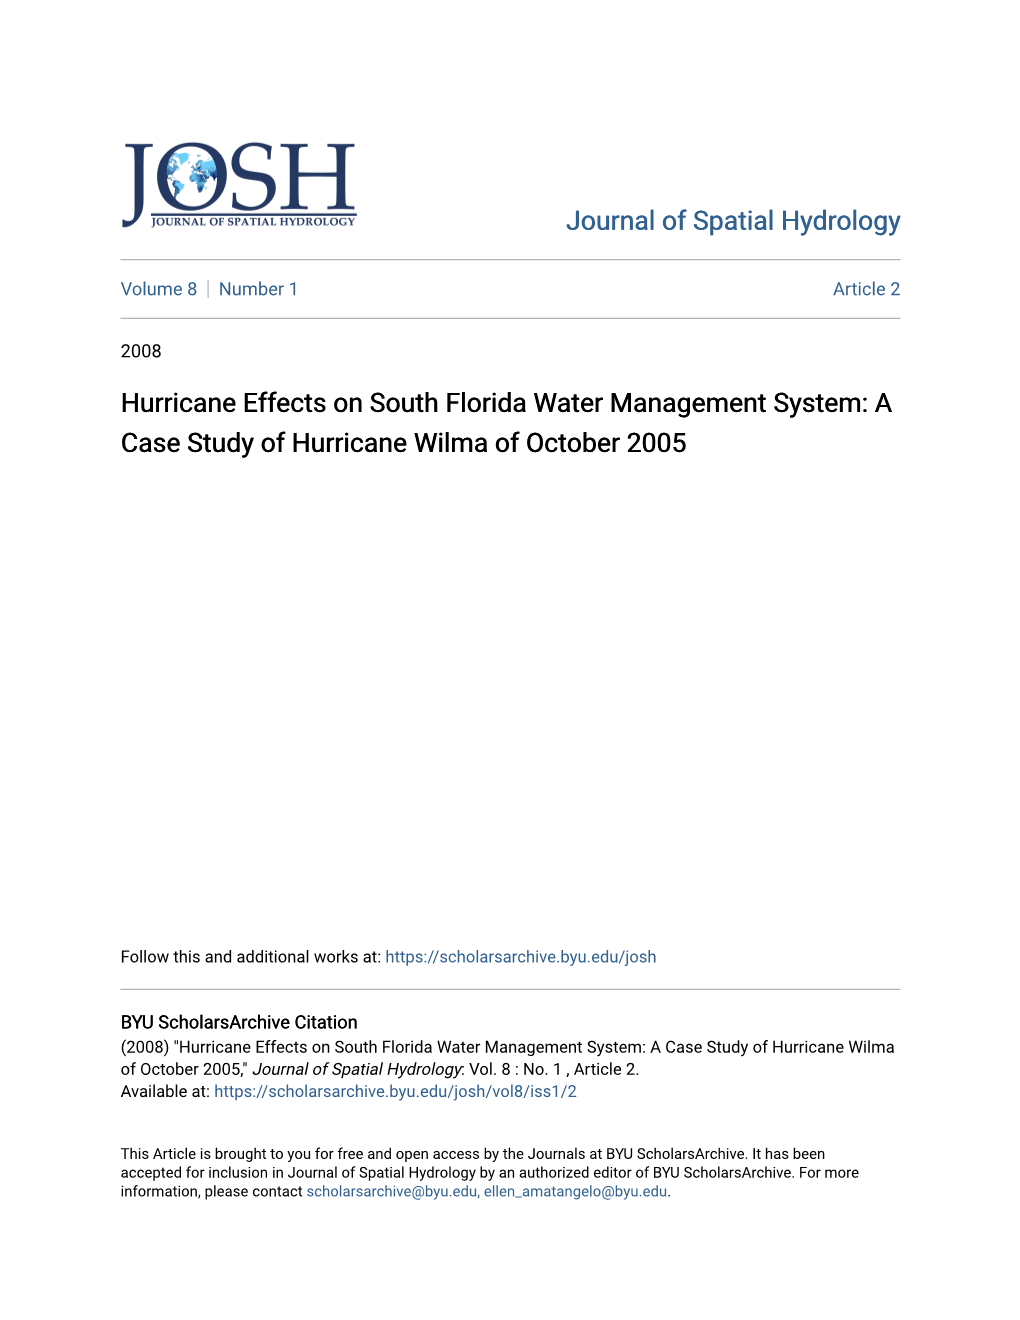 Hurricane Effects on South Florida Water Management System: a Case Study of Hurricane Wilma of October 2005